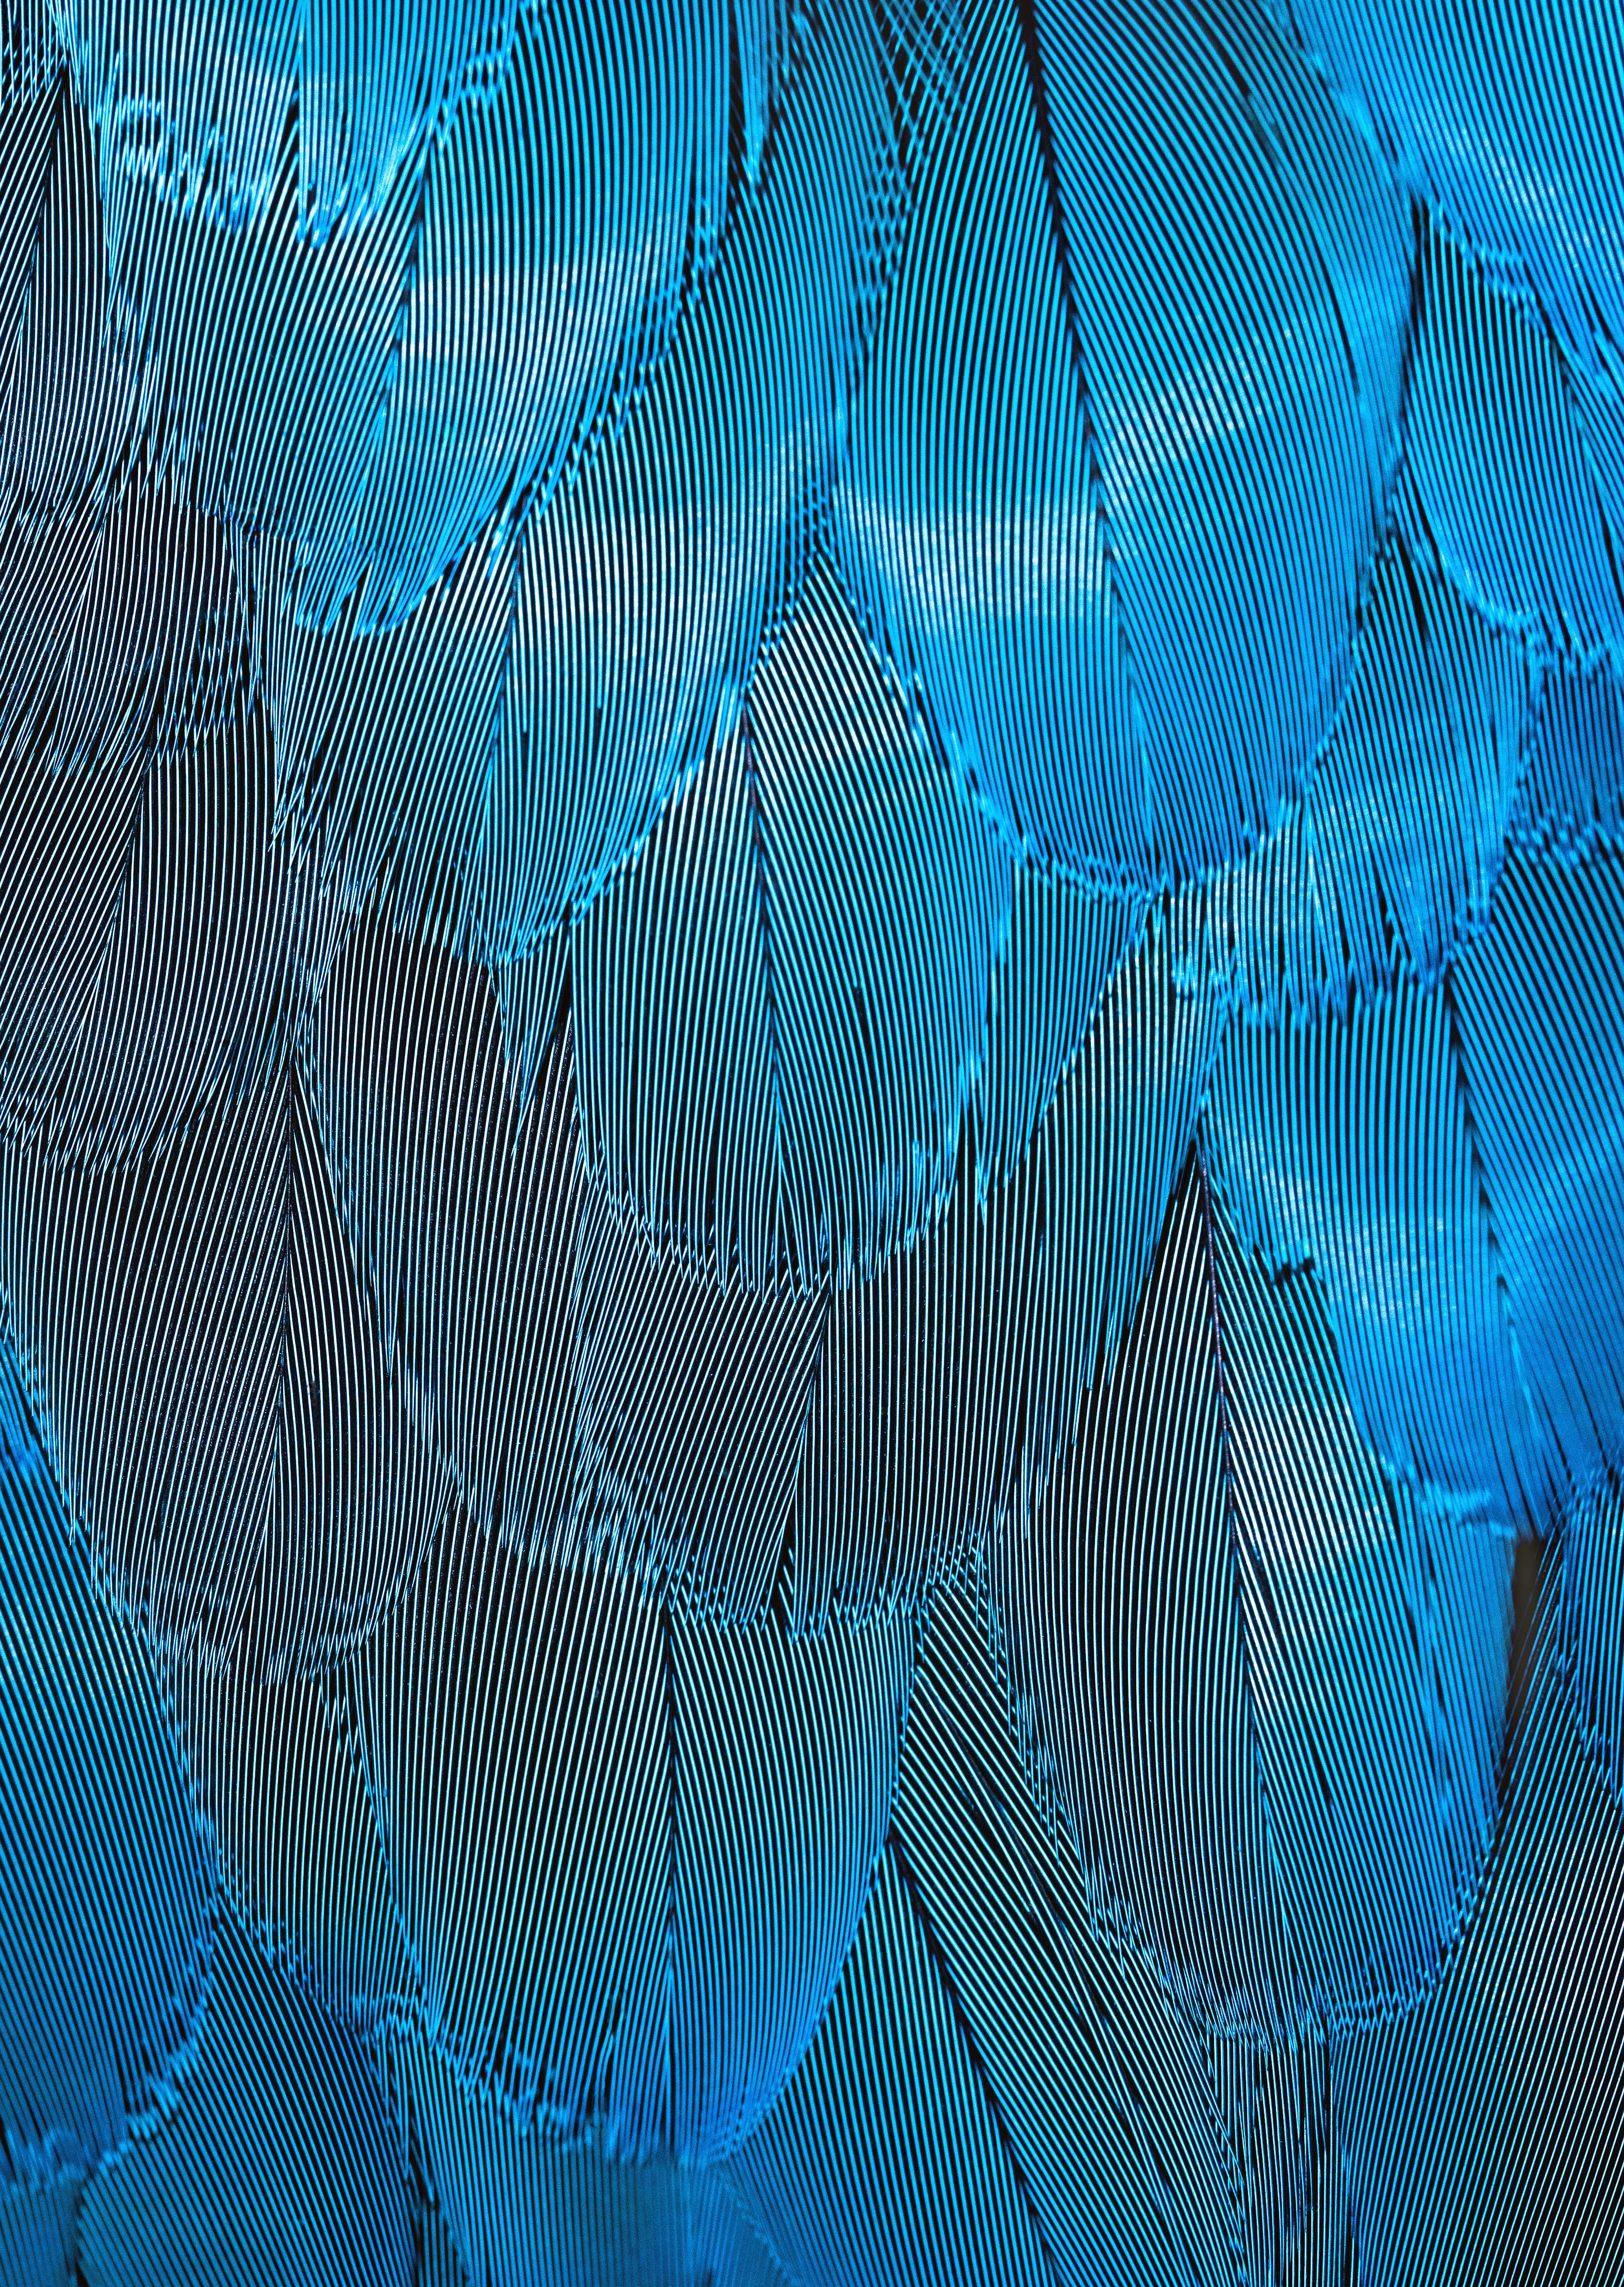 Cool Backgrounds texture, blue, feather, textures Macro